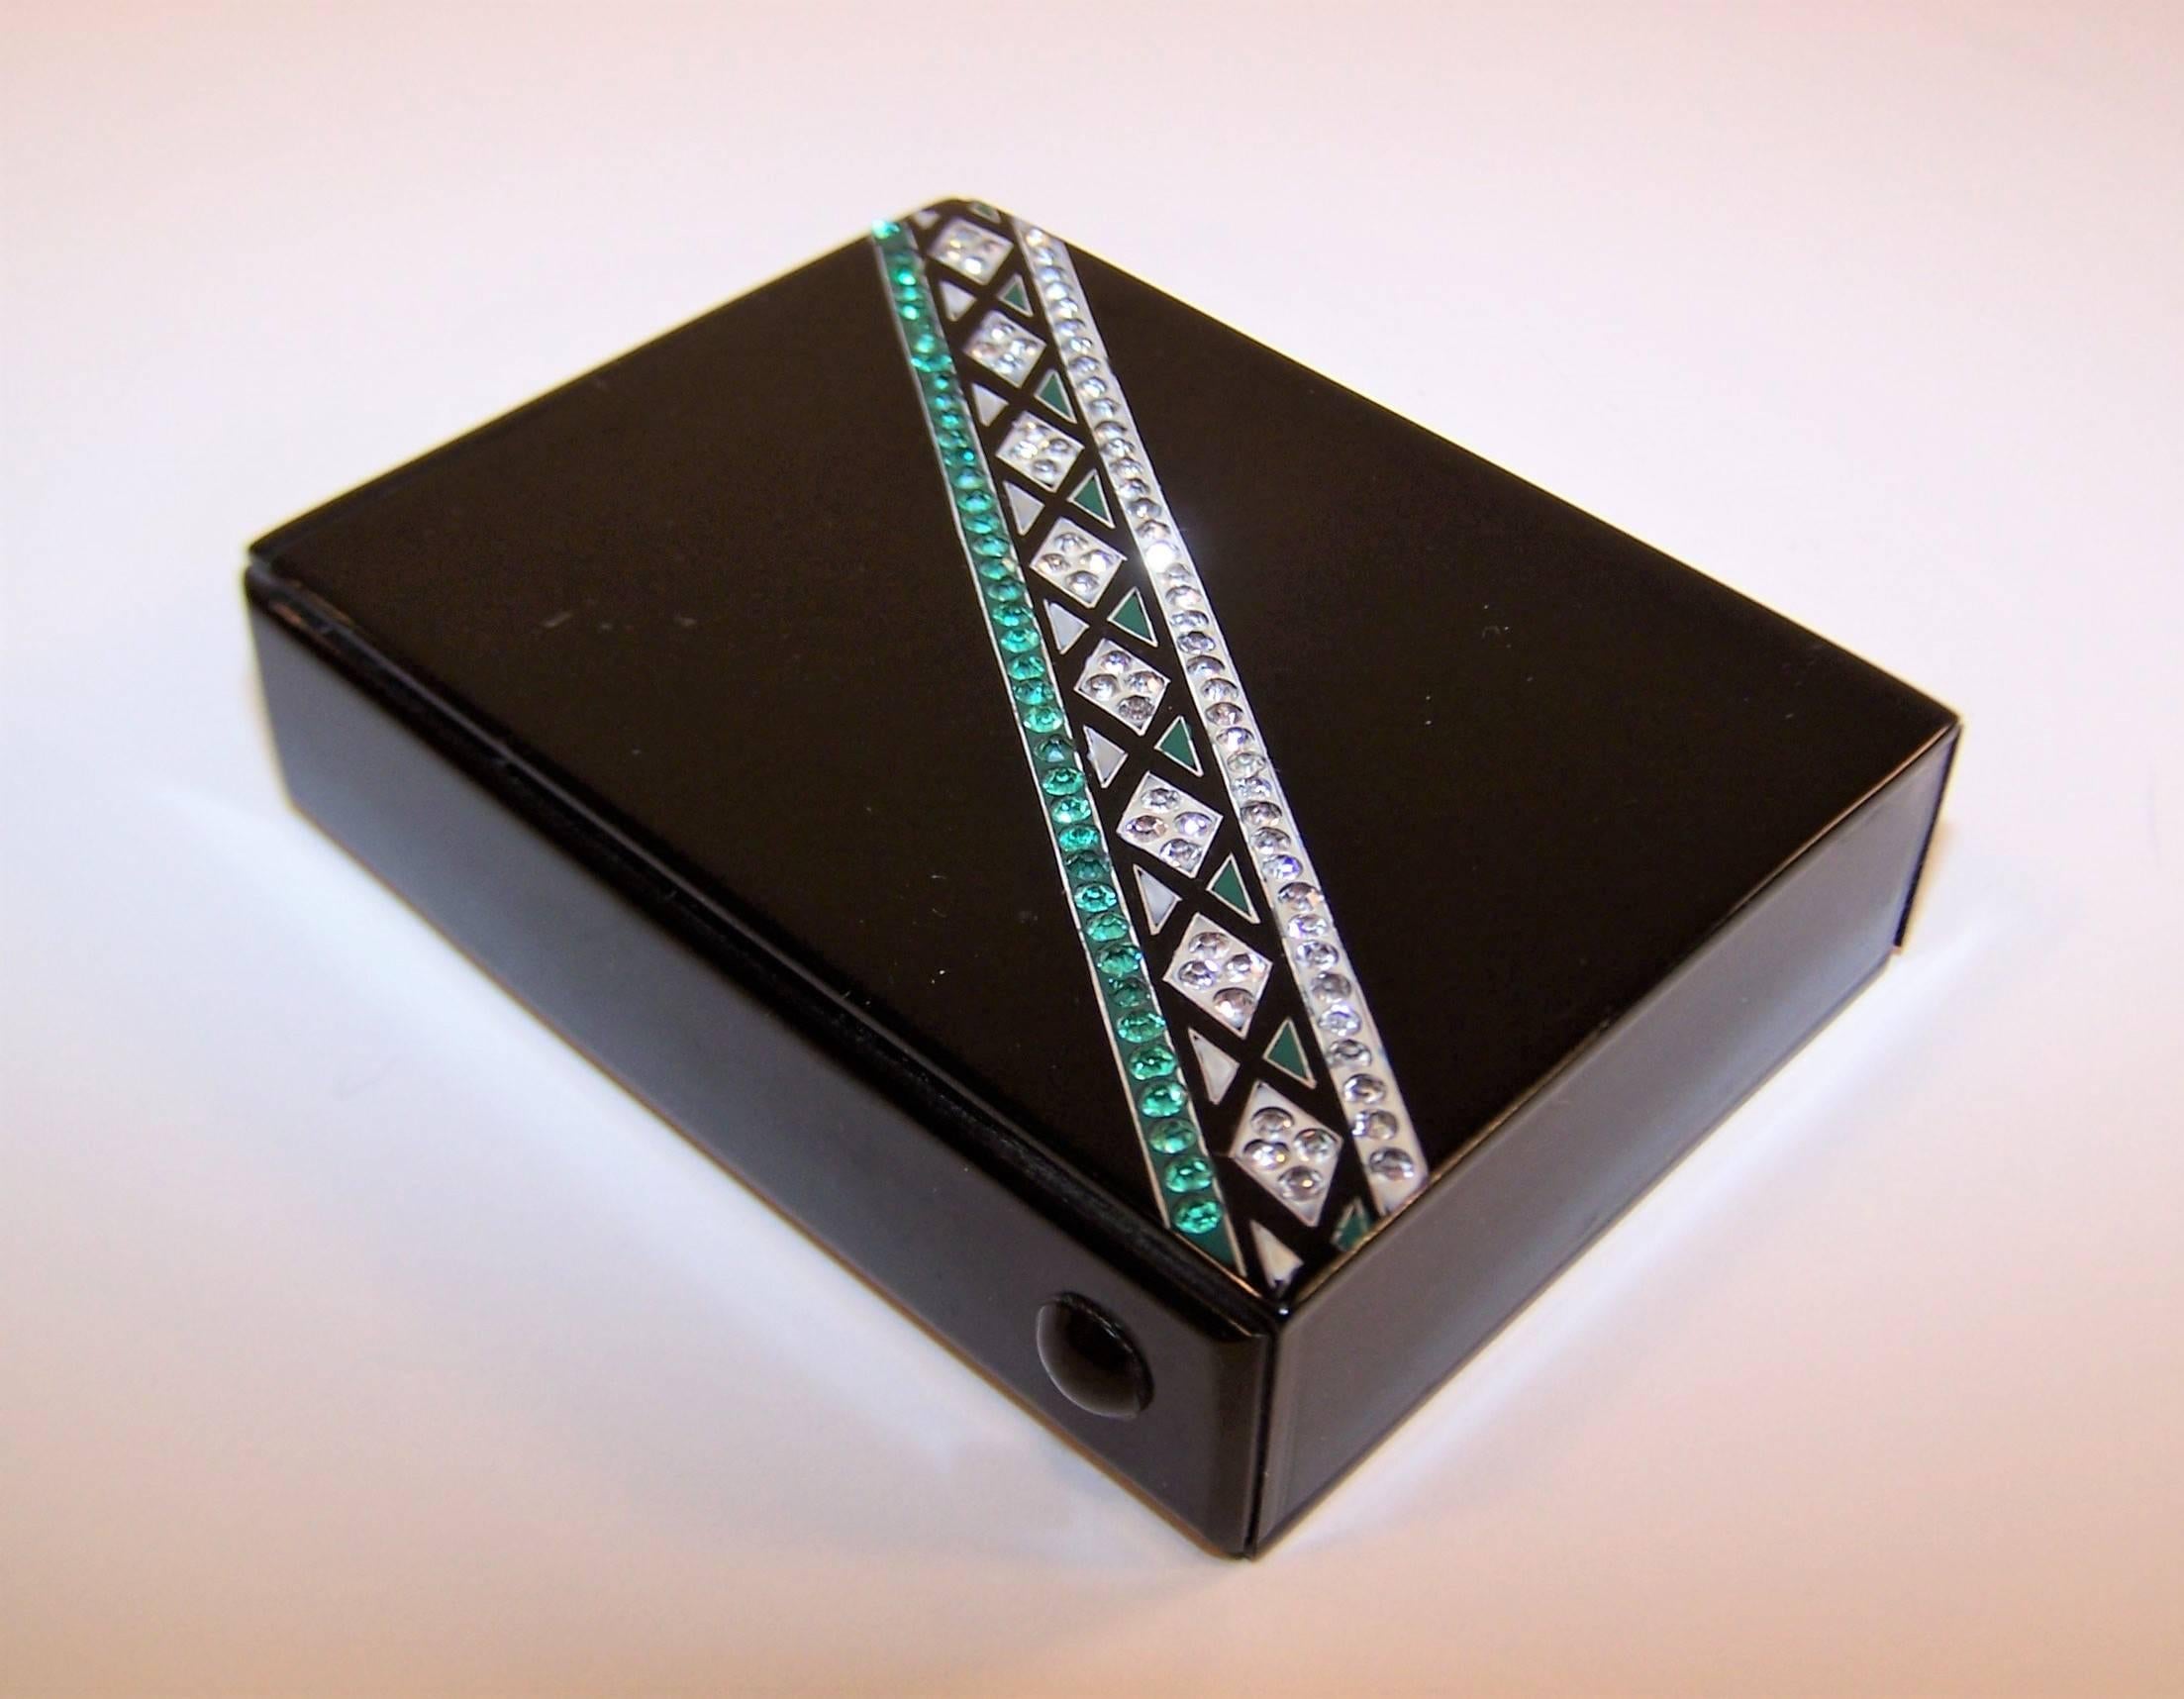 'Sleek and glamorous' are just some of the ways to describe this Art Deco cigarette case.  The black plastic box is decorated at the front with a classic Art Deco linear motif in silver and emerald green with coordinating pave crystal